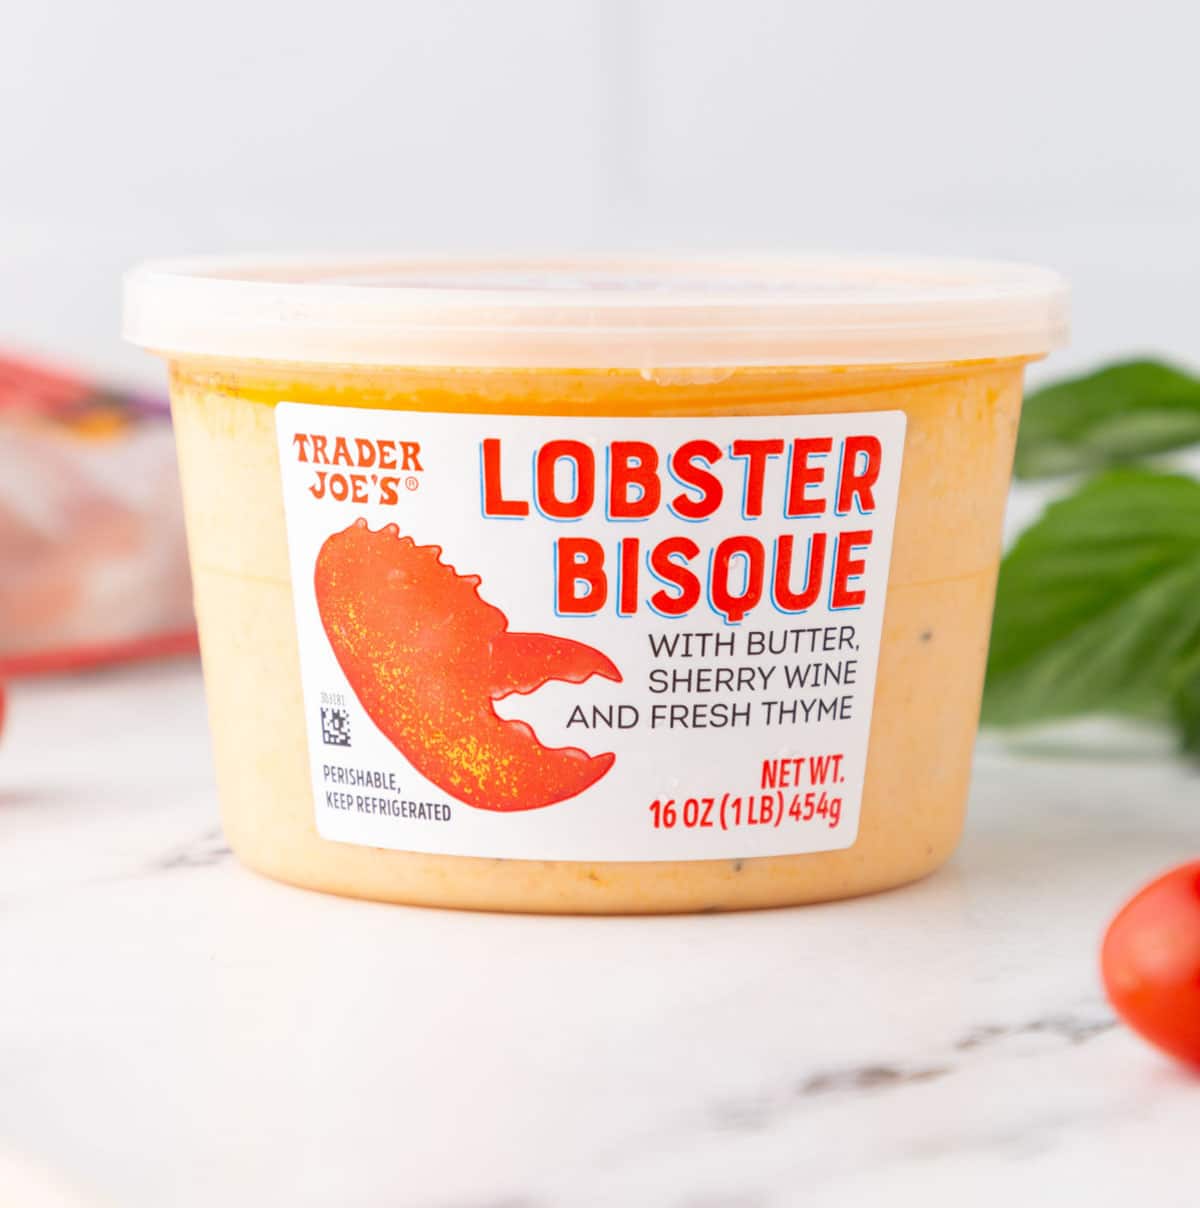 Container of Trader Joe's Lobster Bisque.